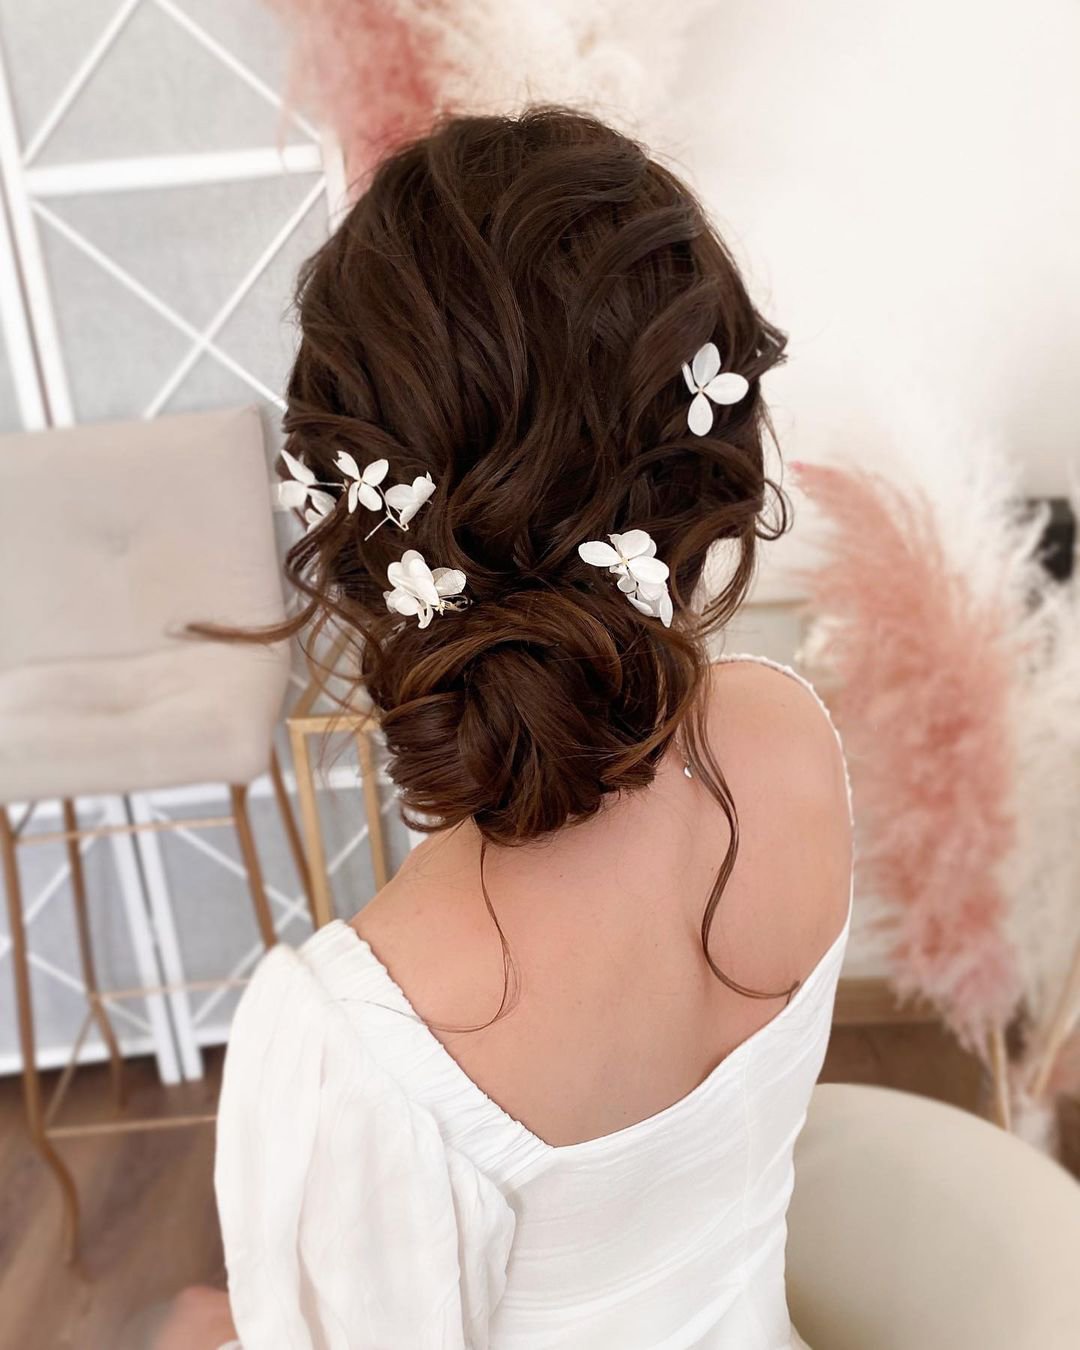 Wedding Hairstyle Ideas For Curly Hair | My Curls